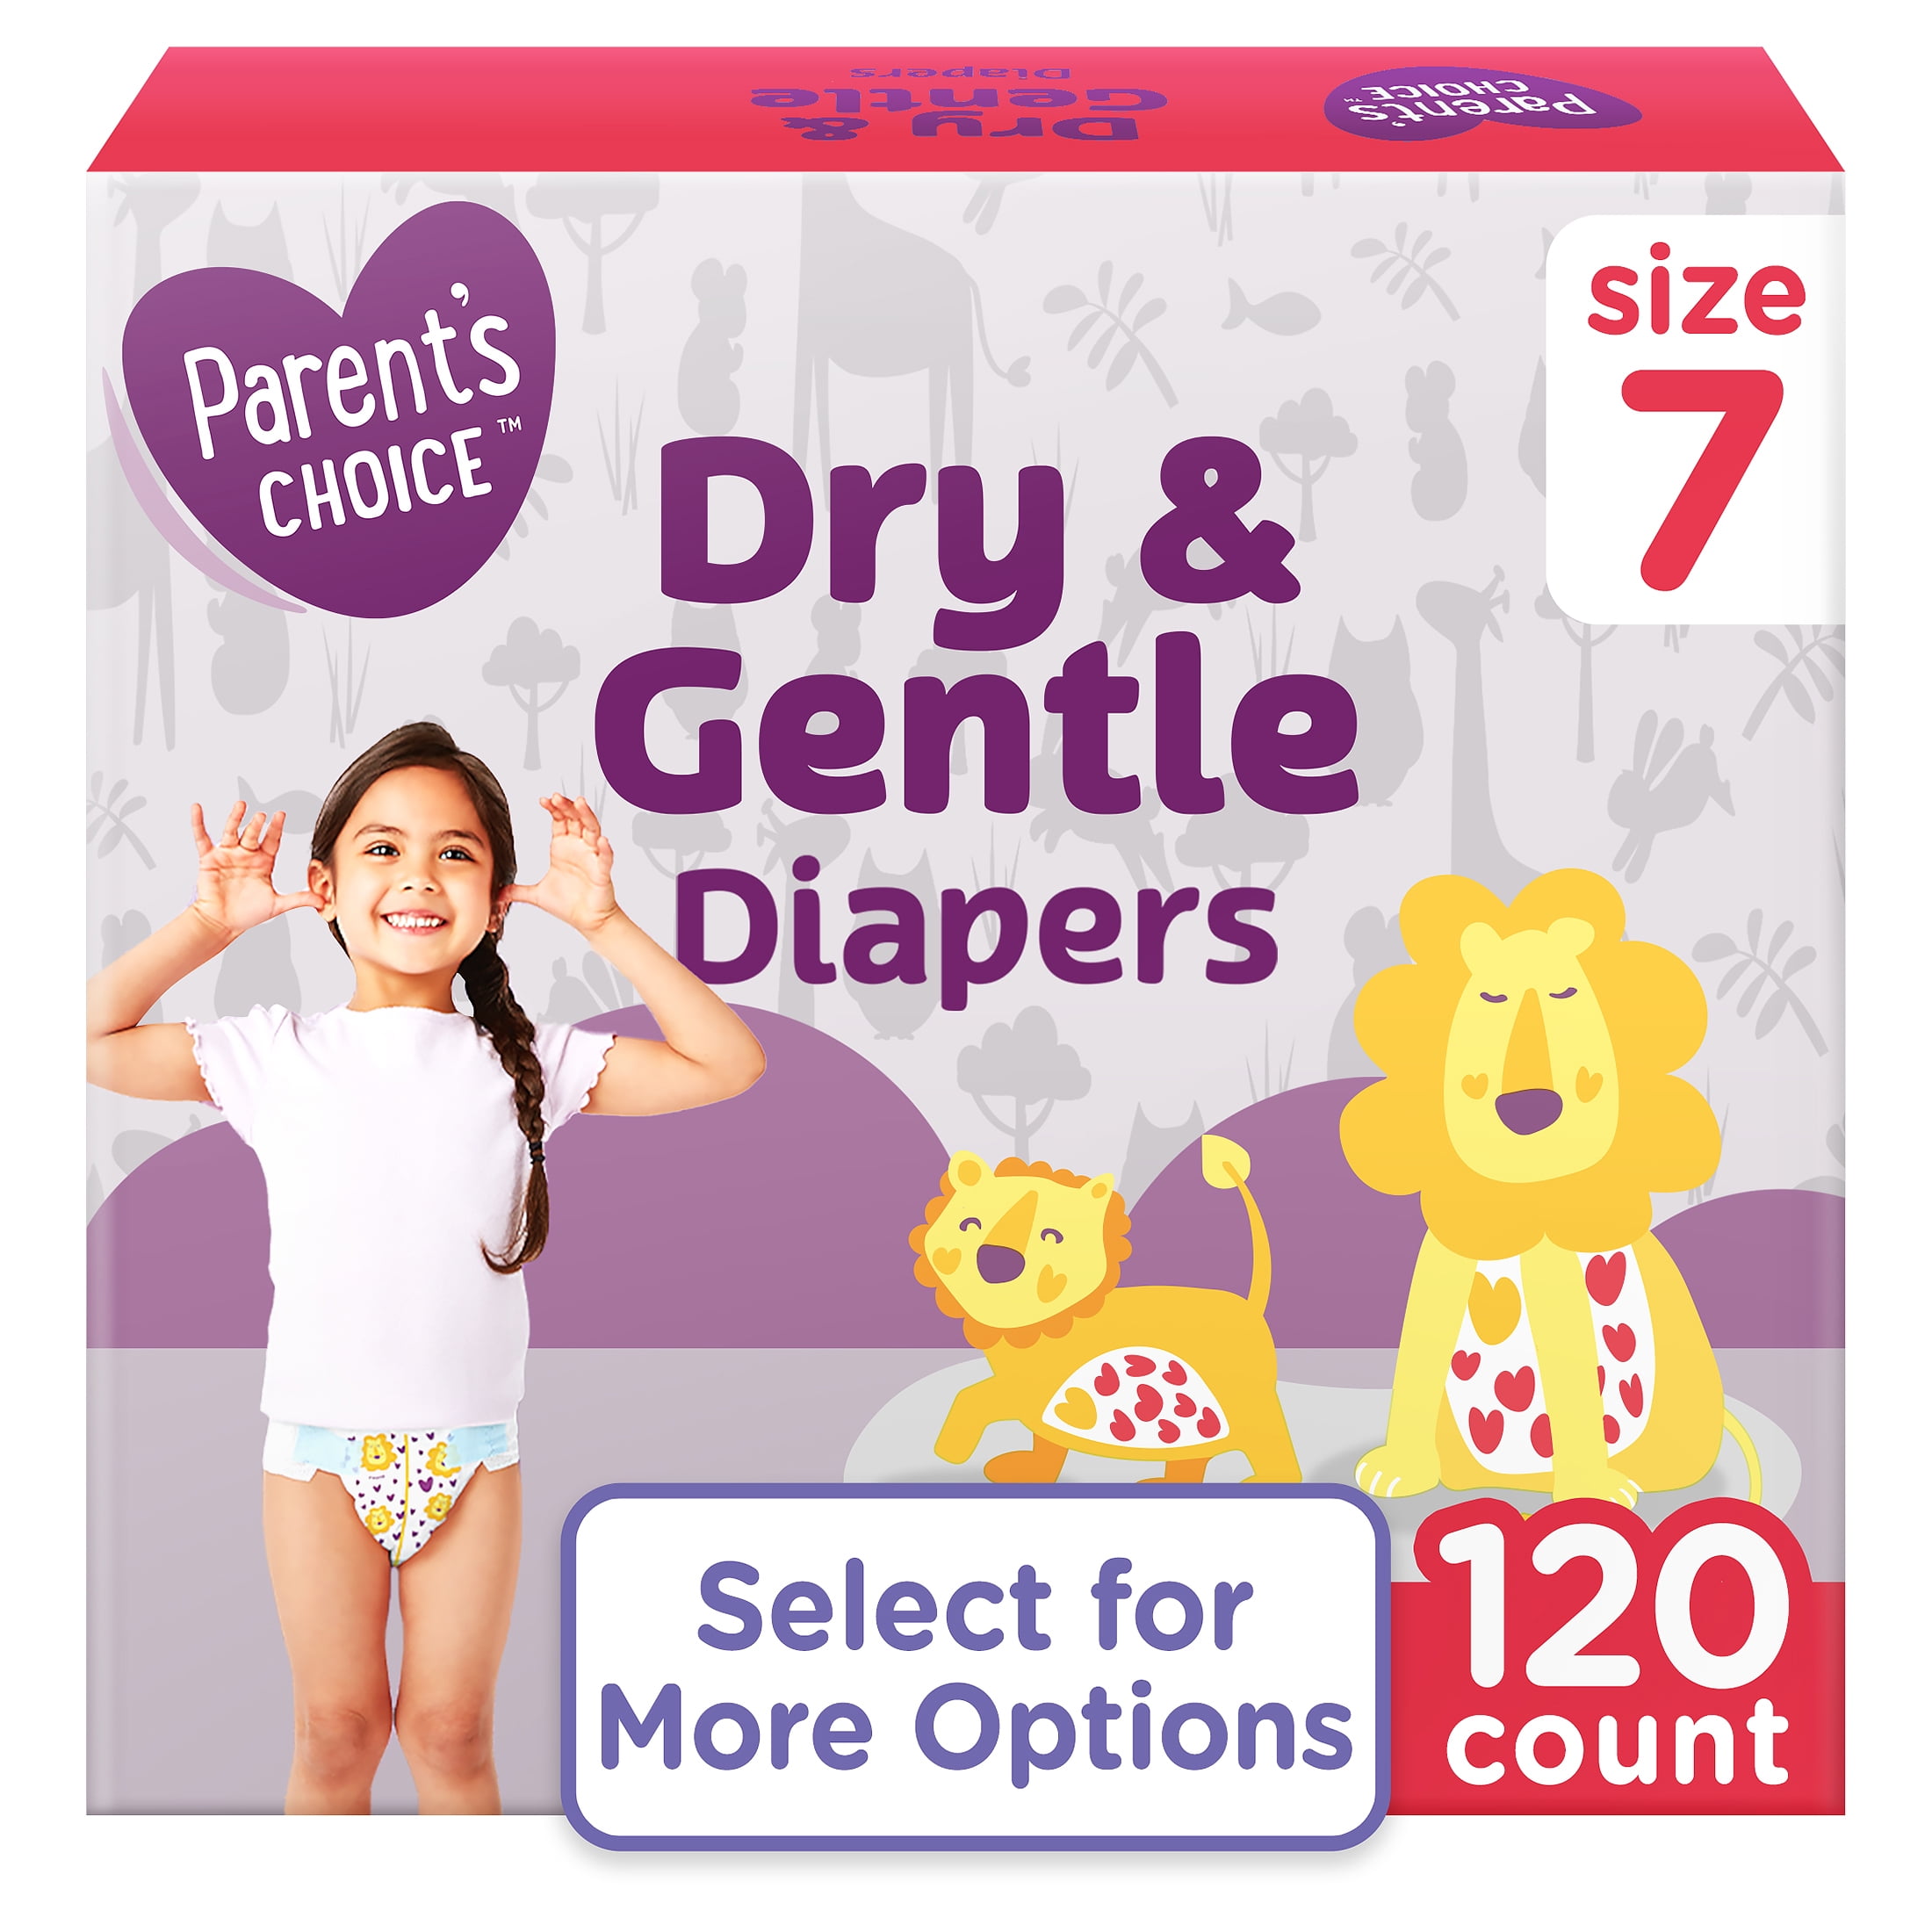 Parent's Choice Dry & Gentle Diapers Size 7, 120 Count (Select for More  Options)